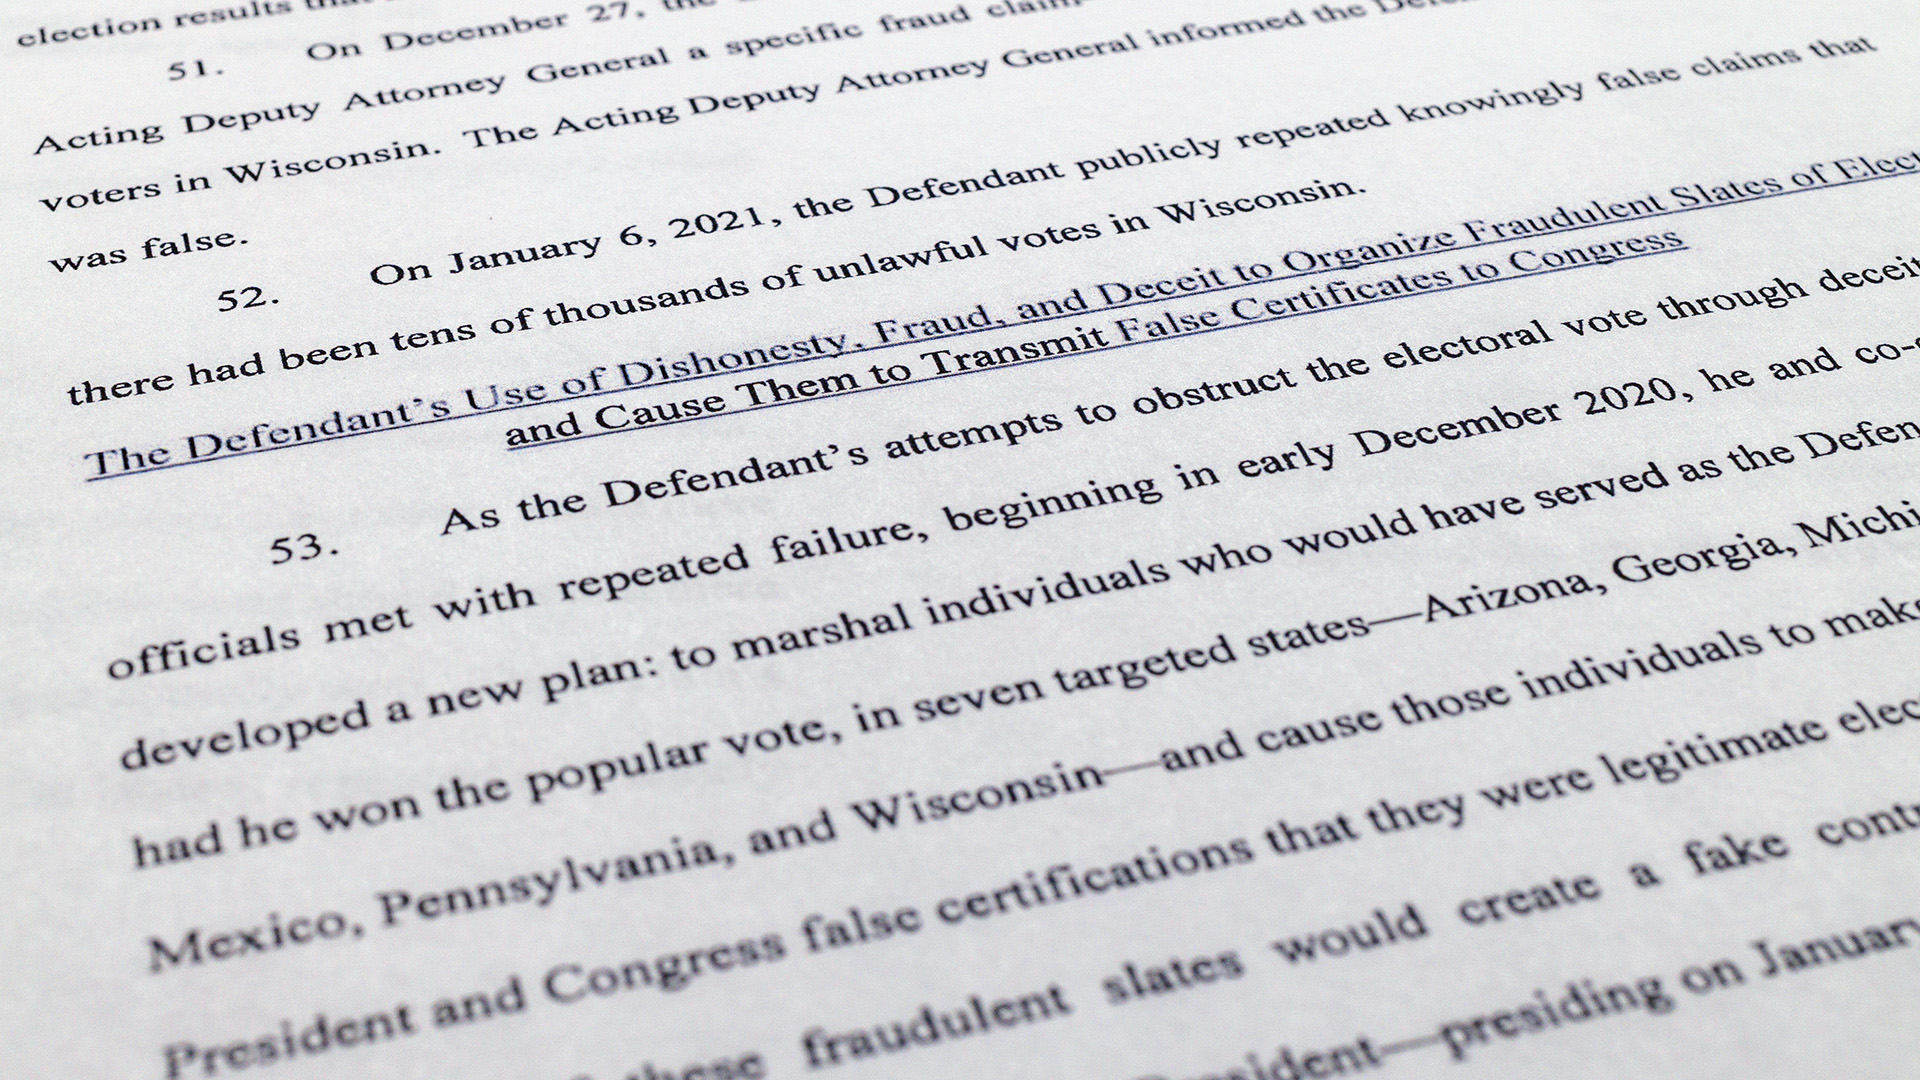 Printed text on a piece of paper reads "The Defendant's Use of Dishonesty, Fraud and Deceit to Organize Fraudulent Slates of Electors and Cause Them to Transmit False Certificates to Congress" with additional text above and below describing a count in an indictment.